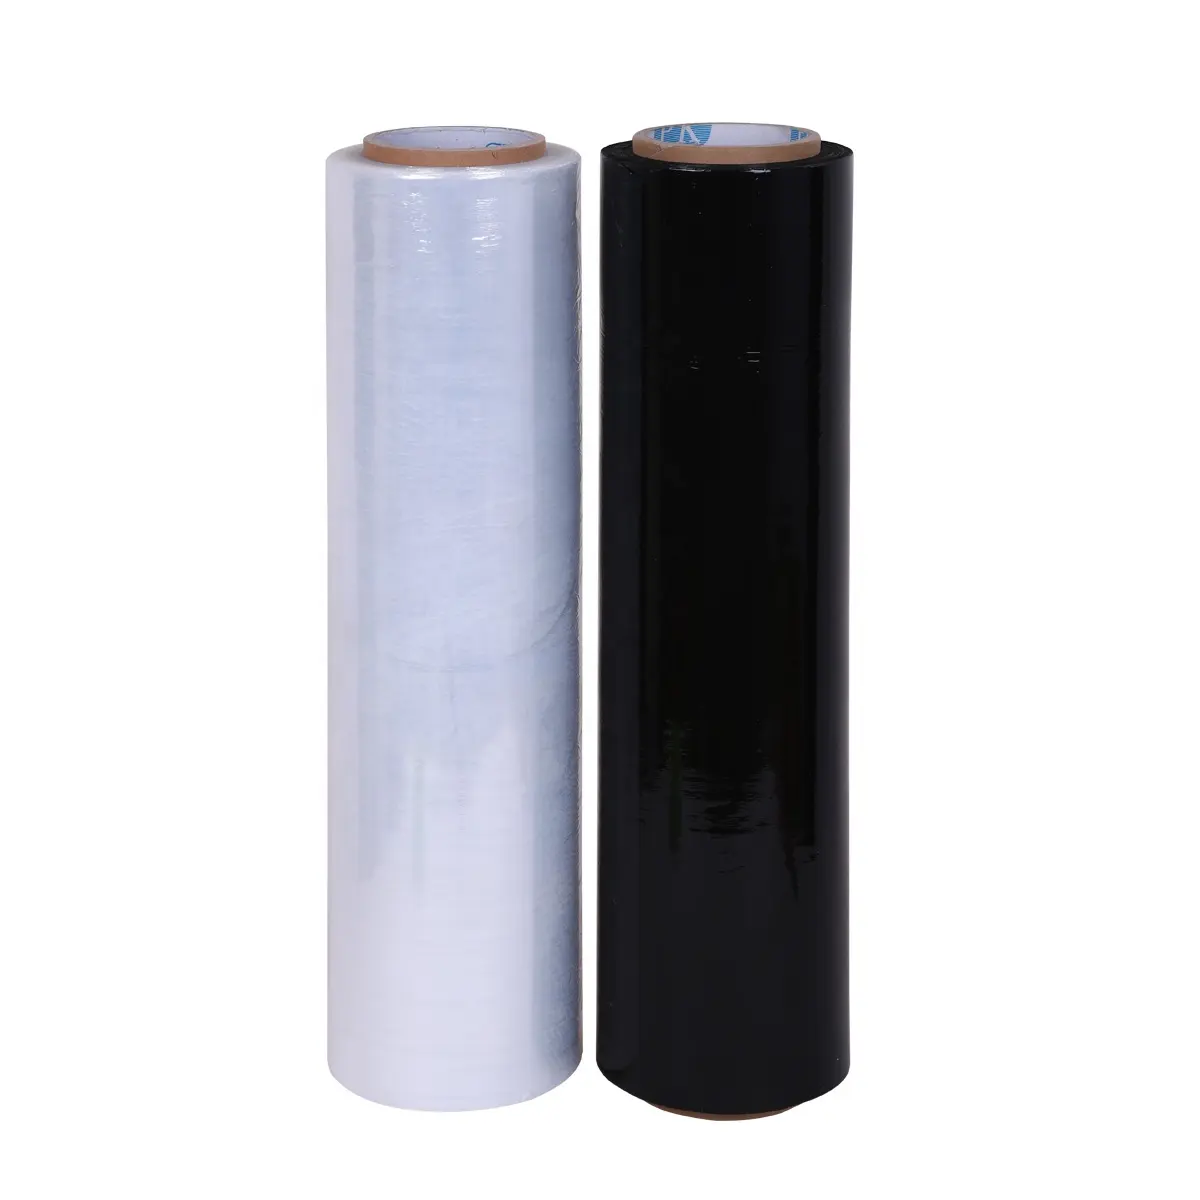 15 years manufacturer free samples high quality ldpe shrink film